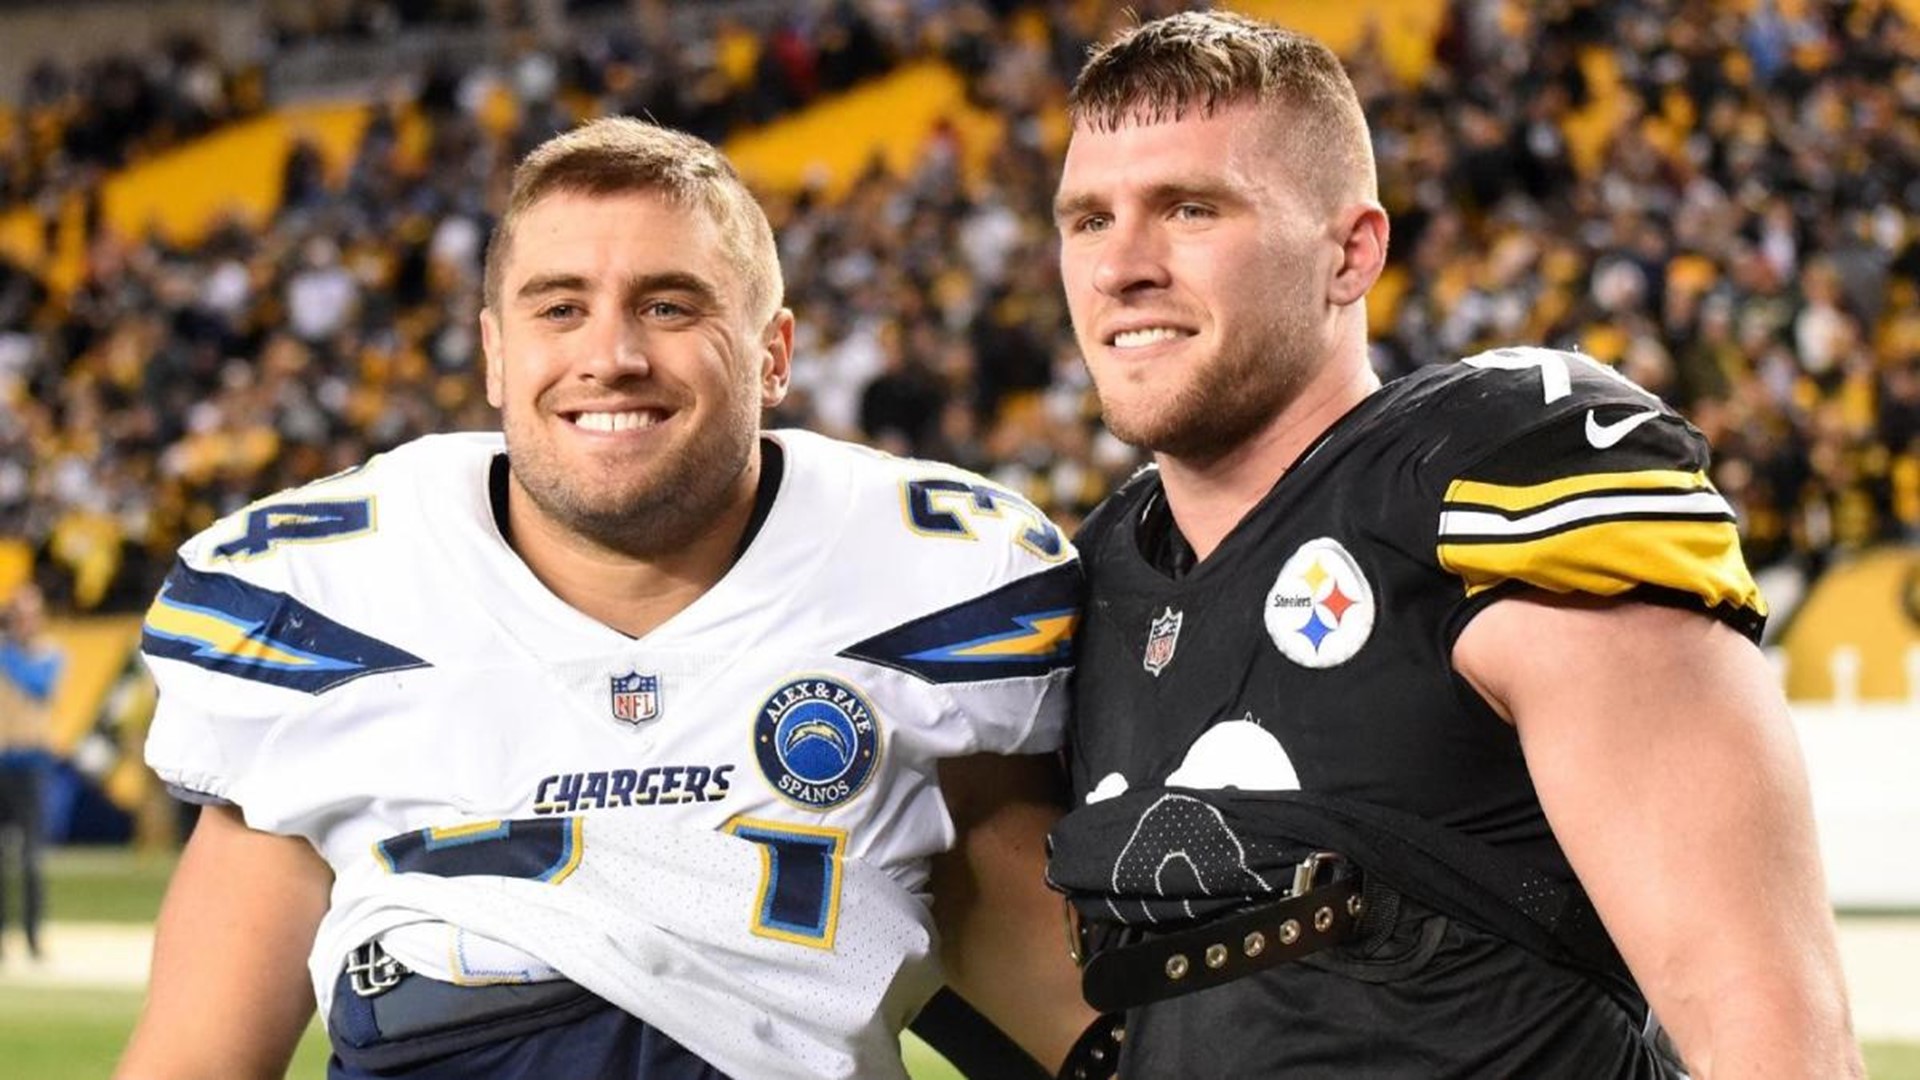 Watt brothers will play together on the same NFL team